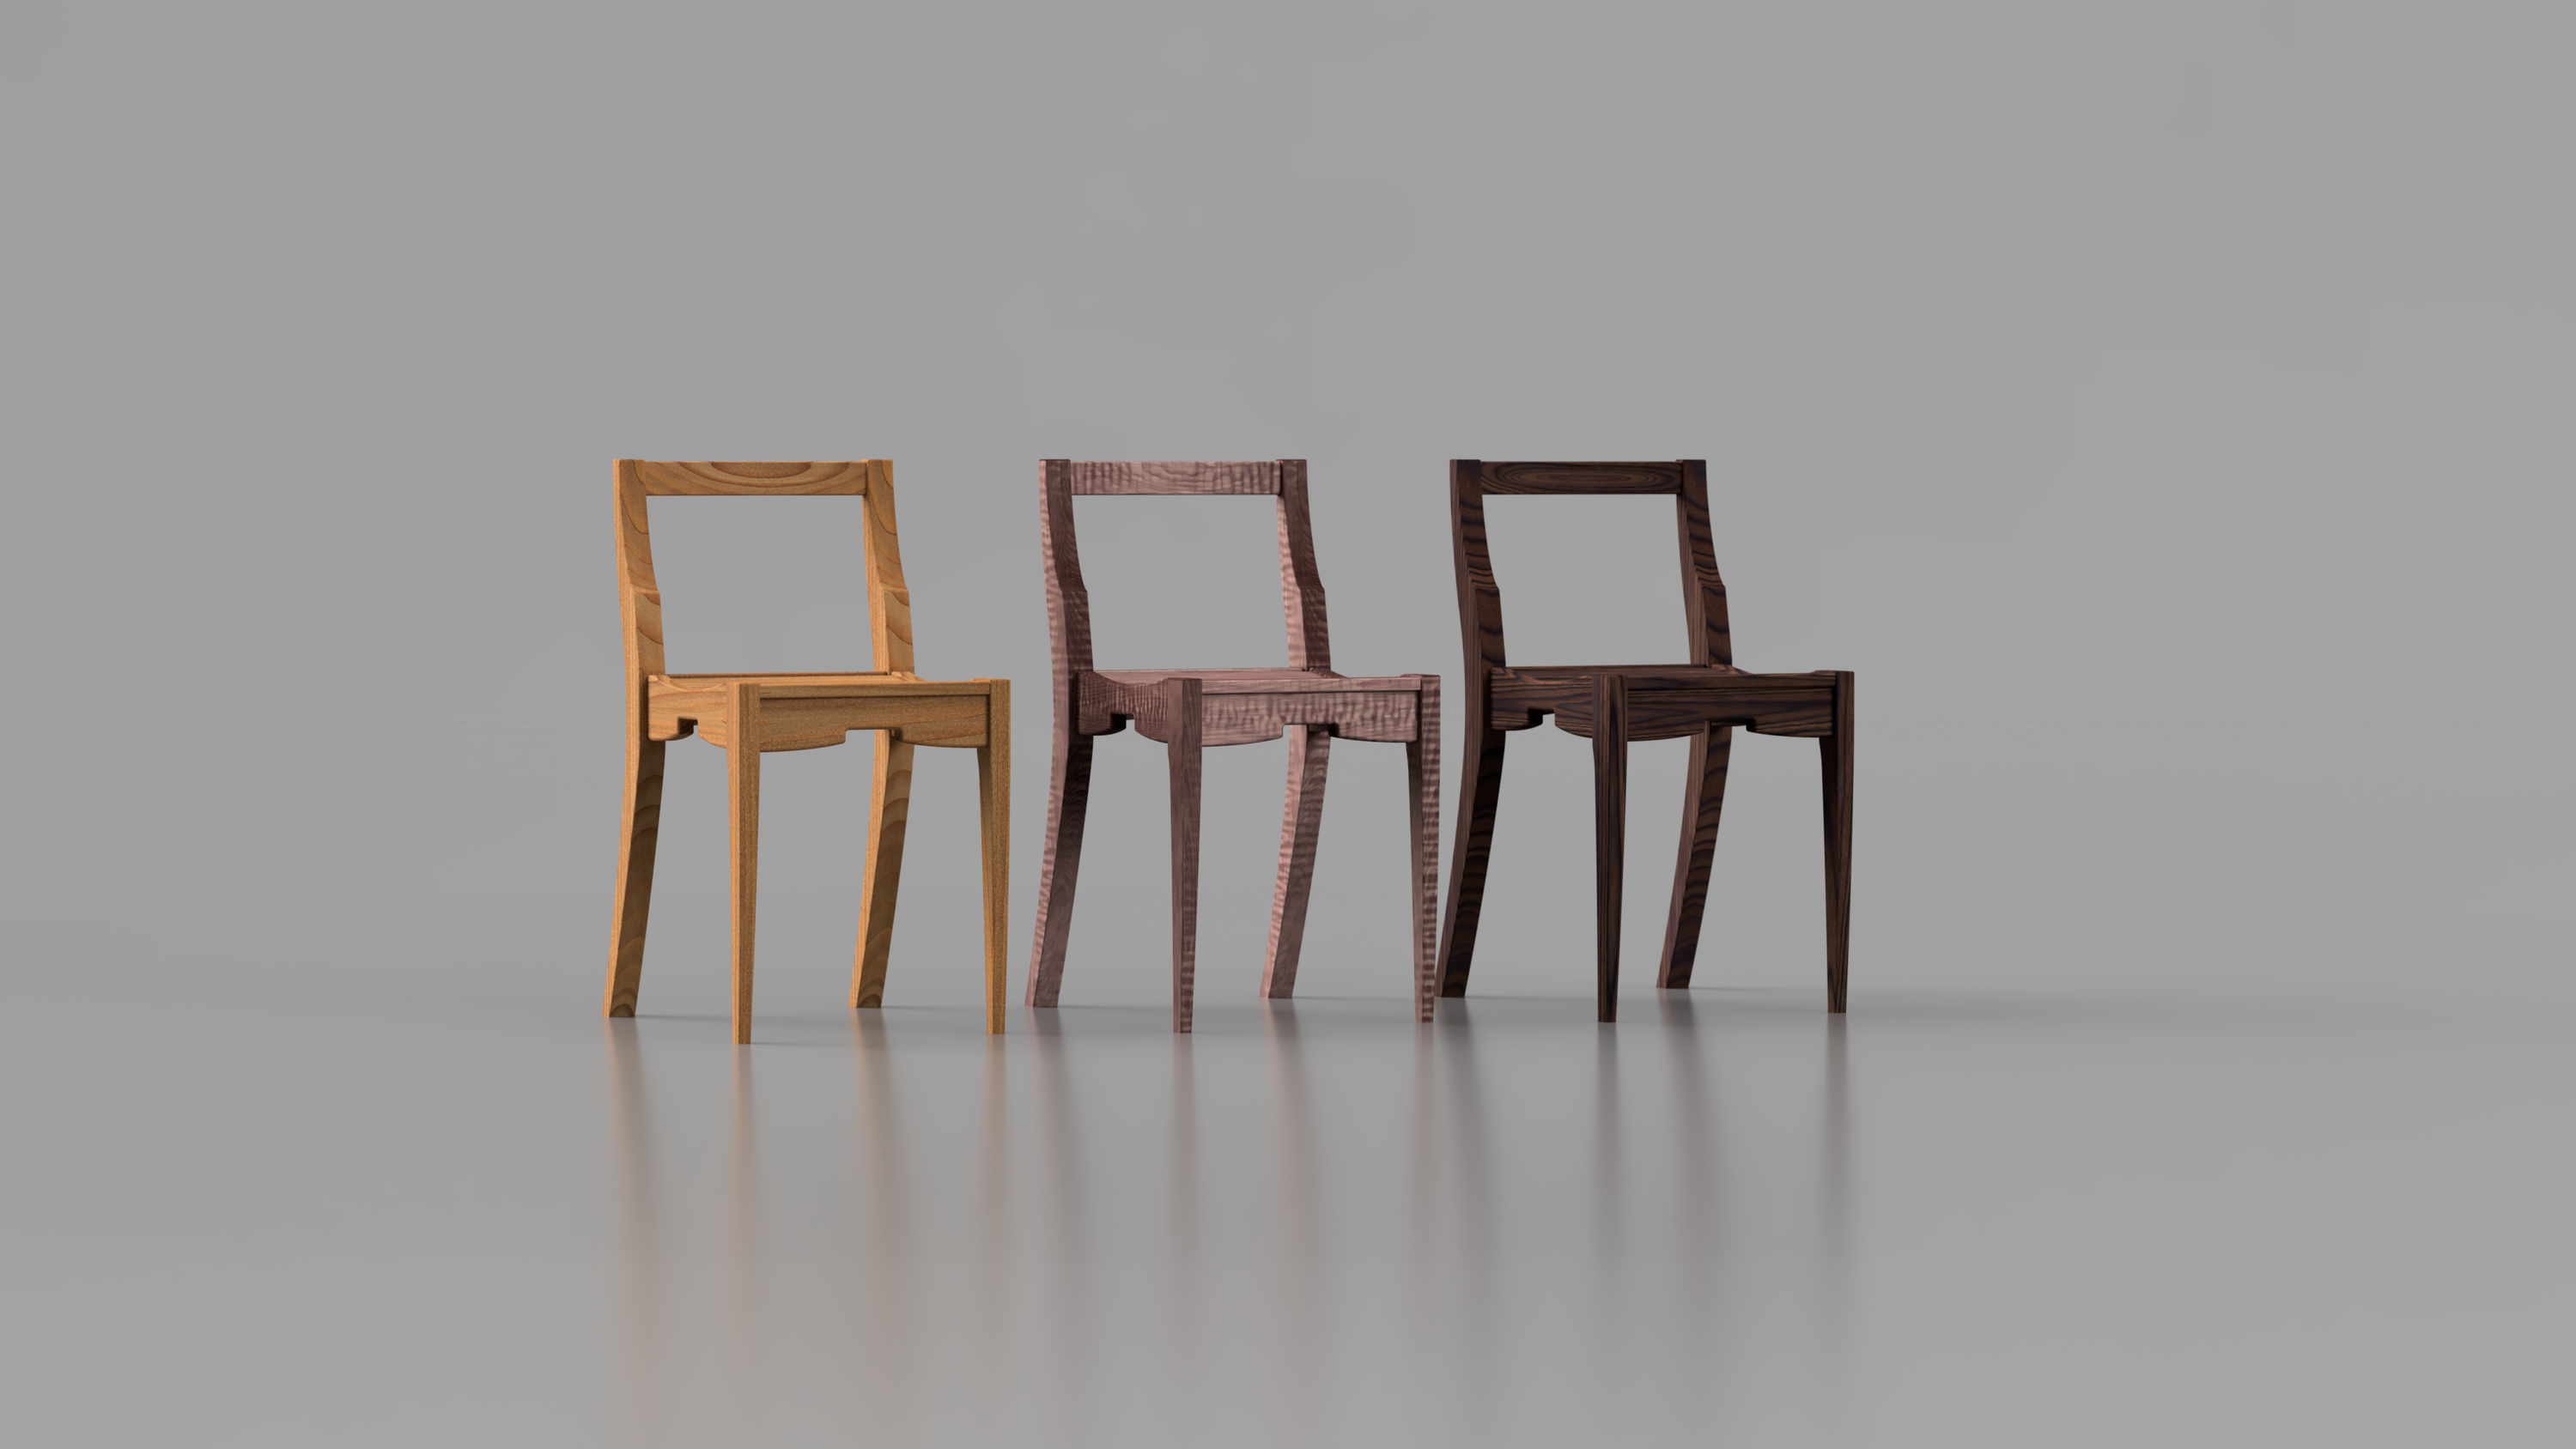 3 different type of wood chairs